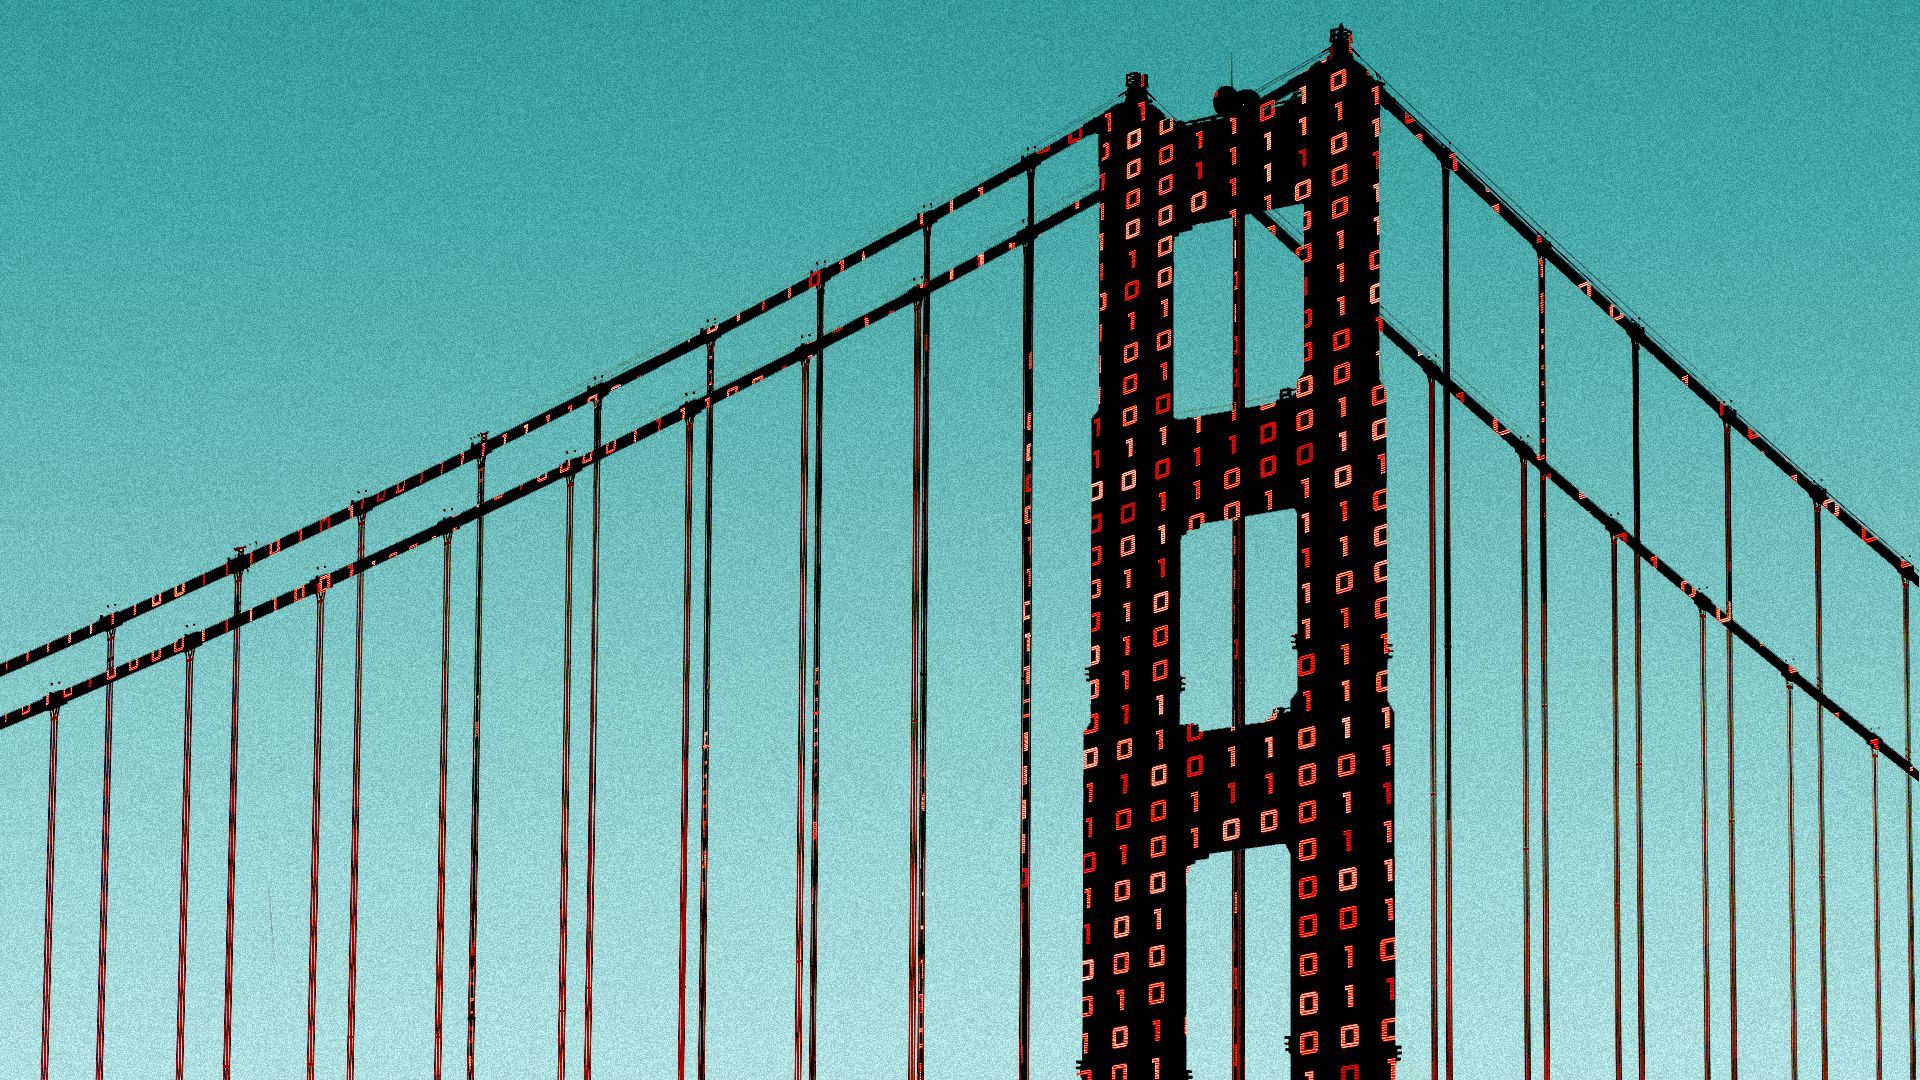 Illustration of the Golden Gate Bridge silhouetted and covered with red binary code.